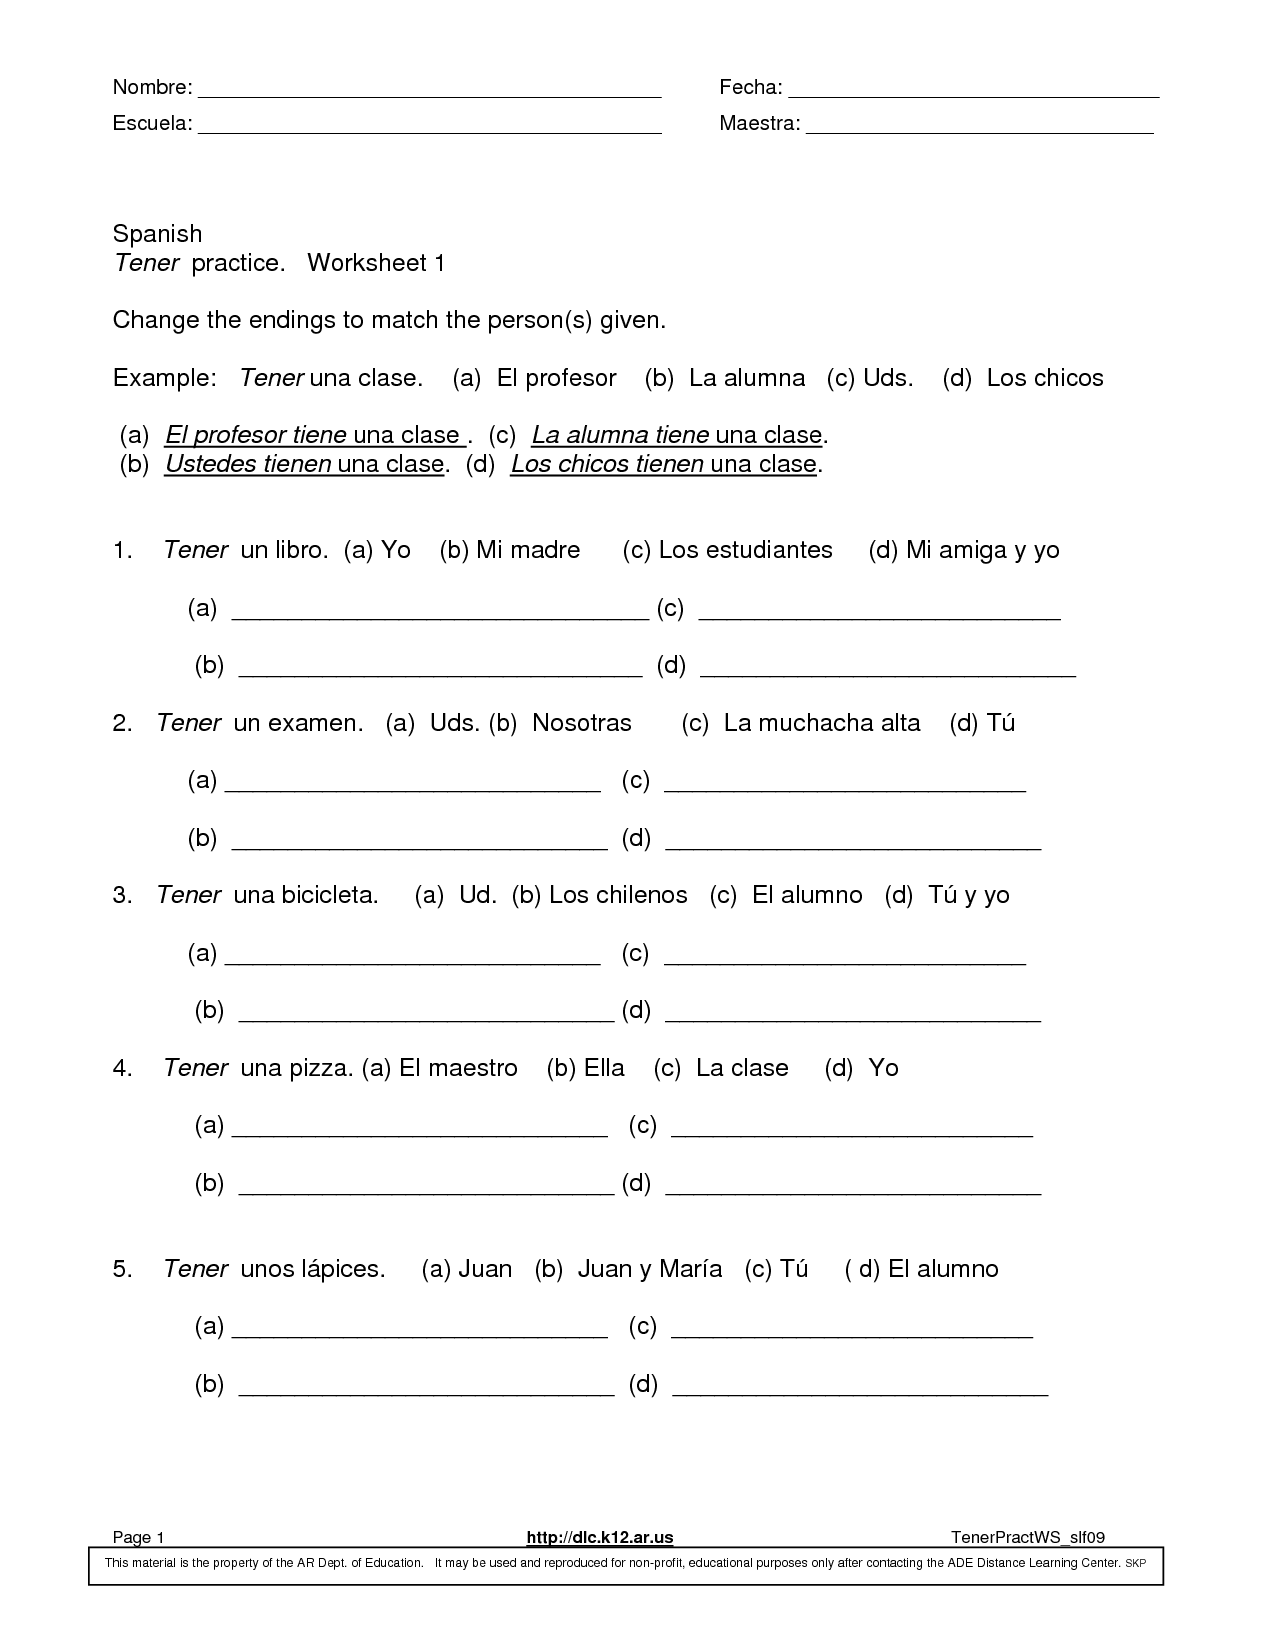 10 Best Images of Spanish Worksheet Tener Answers - Spanish Practice